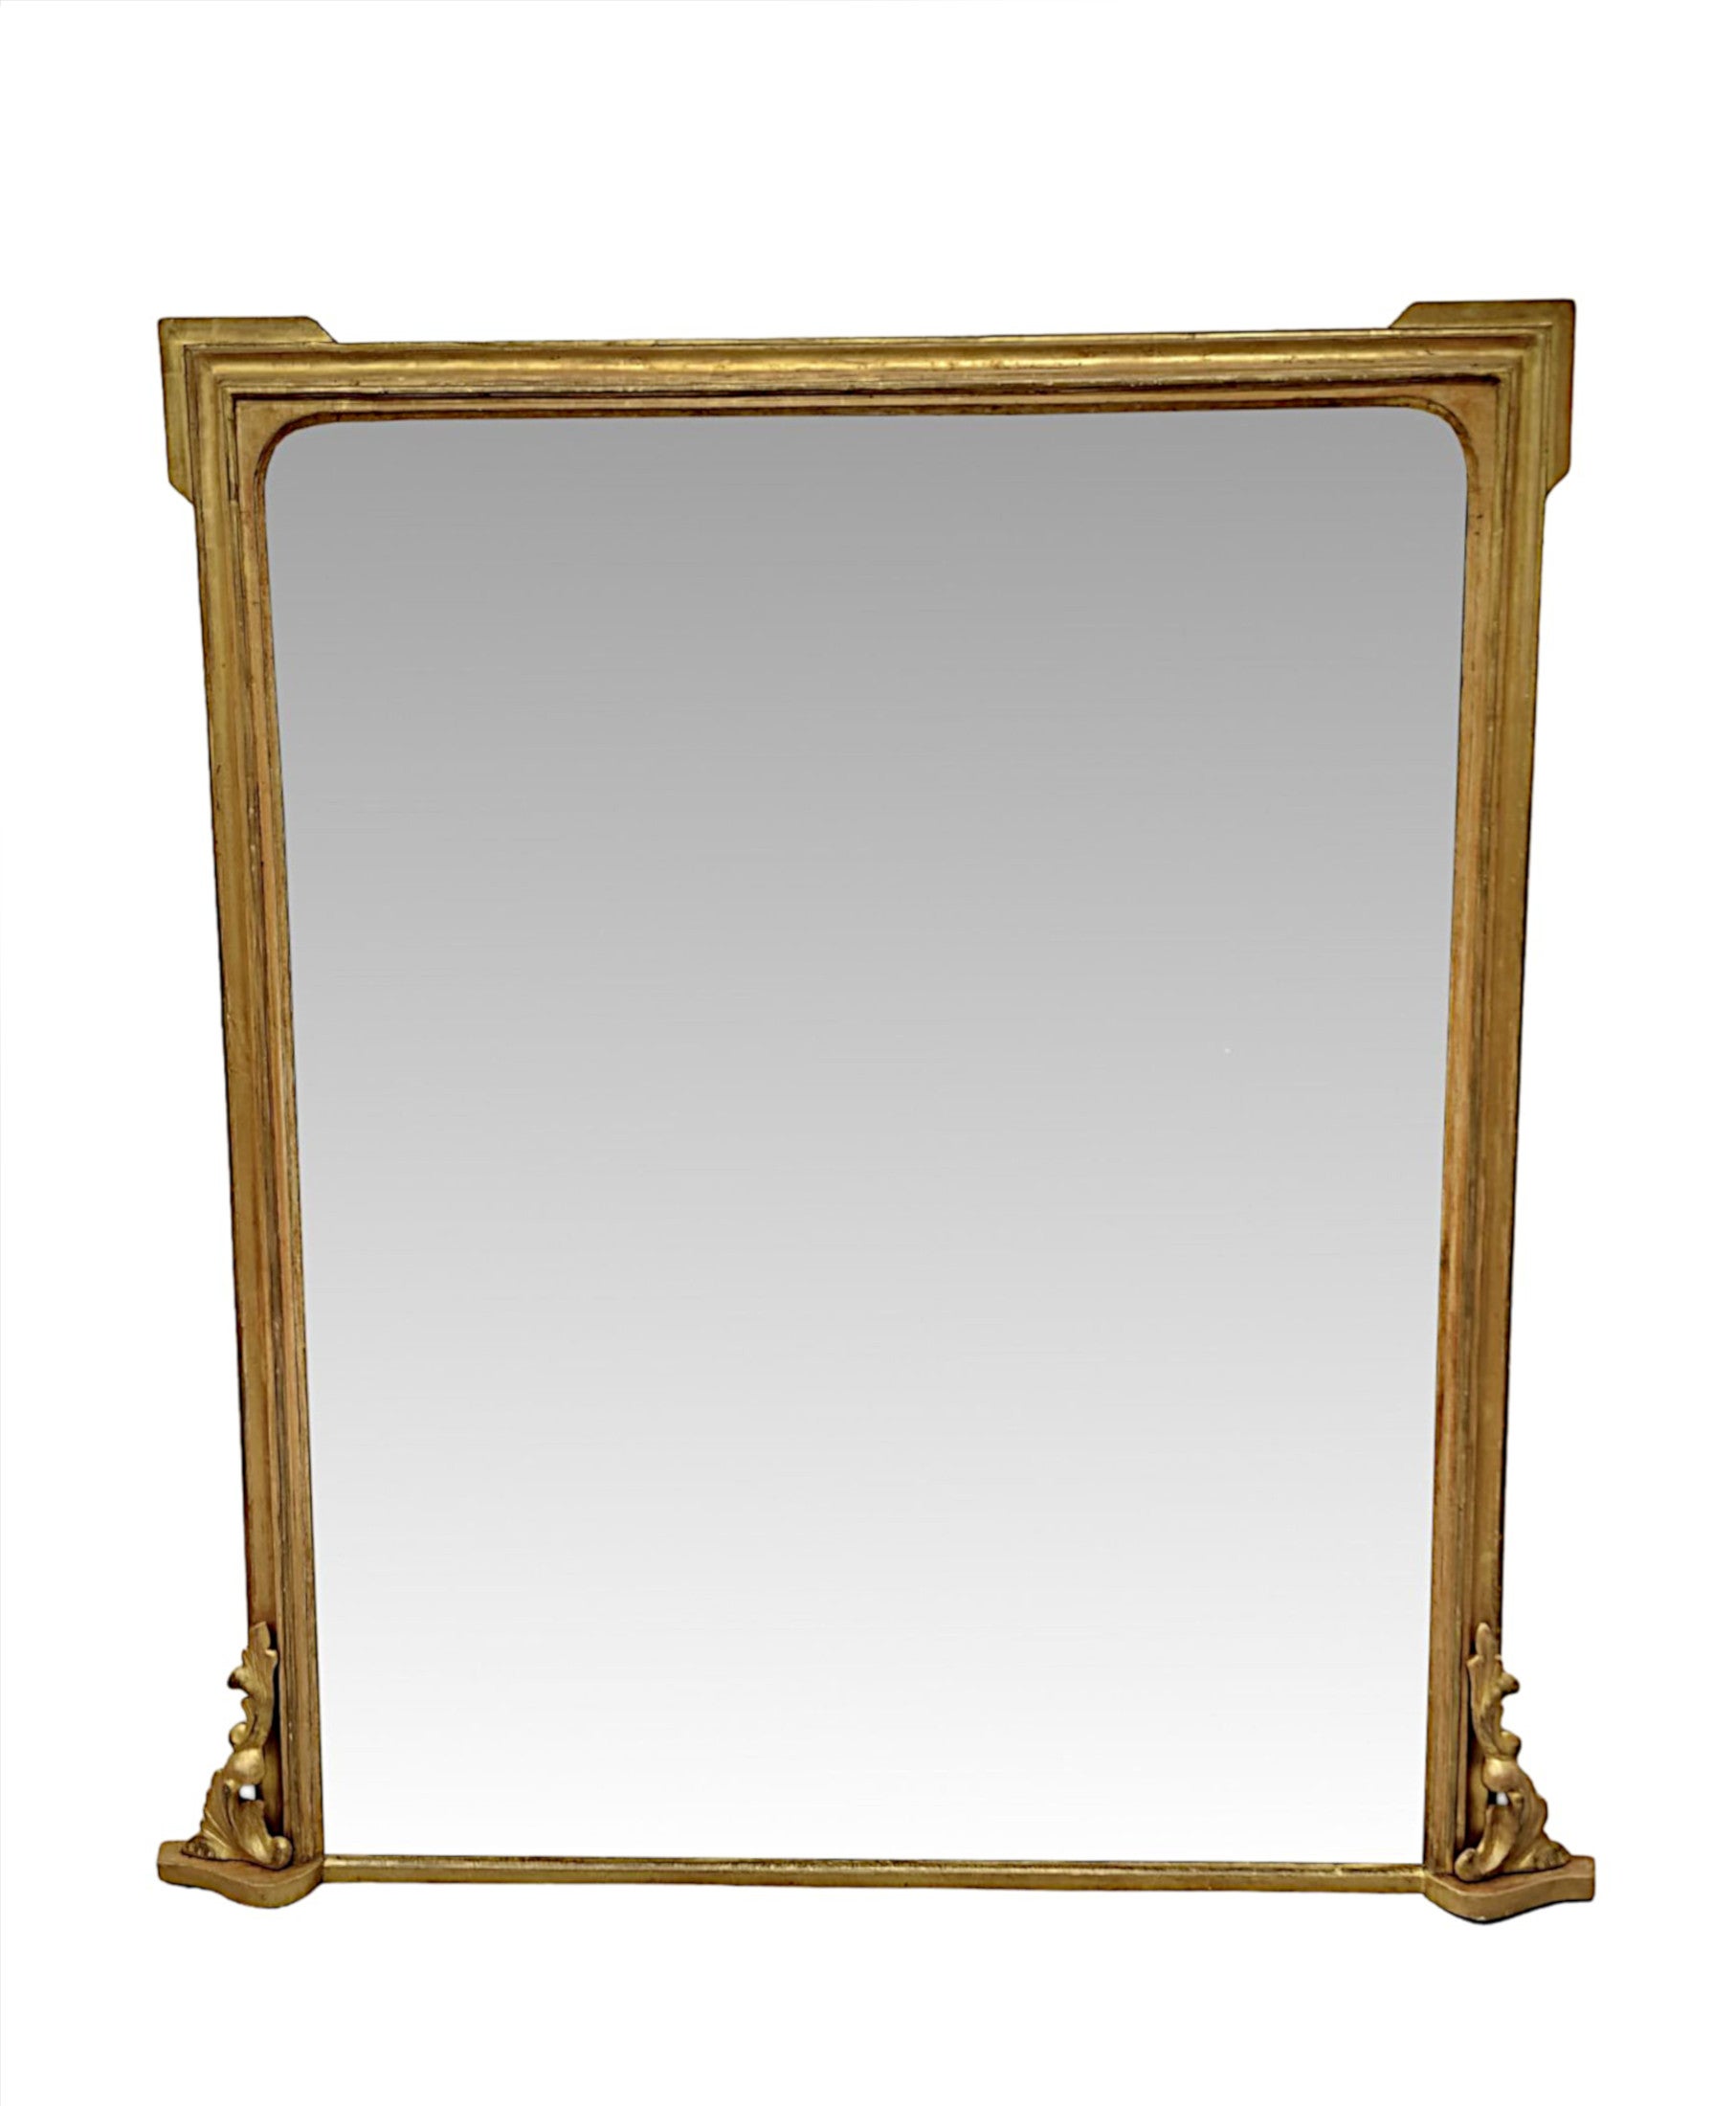 A Fabulous Large Size 19th Century Giltwood Overmantel Mirror For Sale